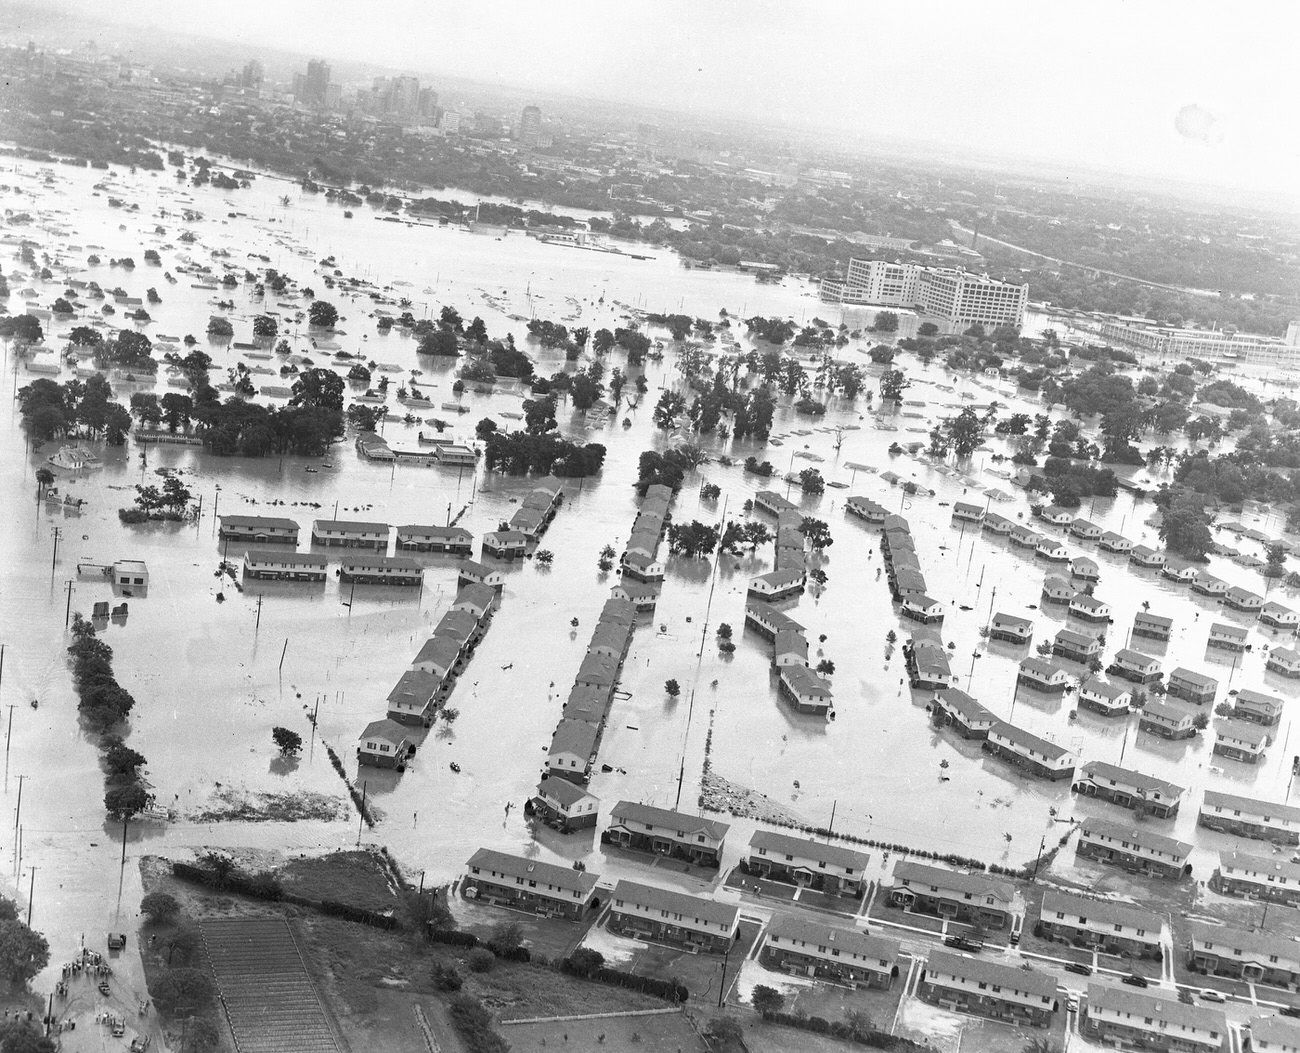 Fort Worth, Texas, flood of 1949, showing a neighborhood of homes under water. The large Montgomery Ward building received extensive damage.